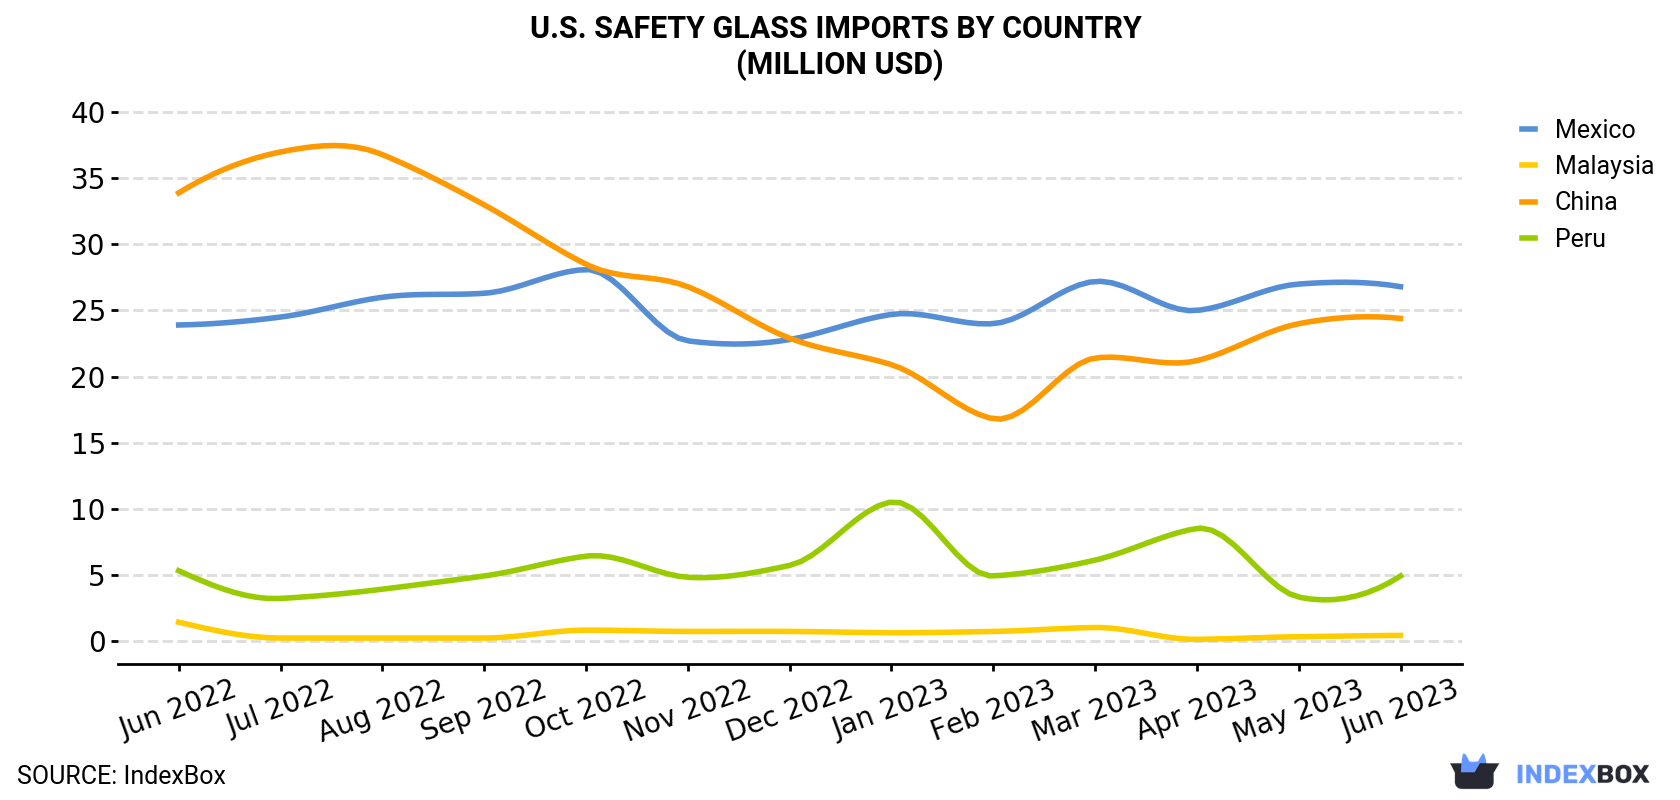 U.S. Safety Glass Imports By Country (Million USD)